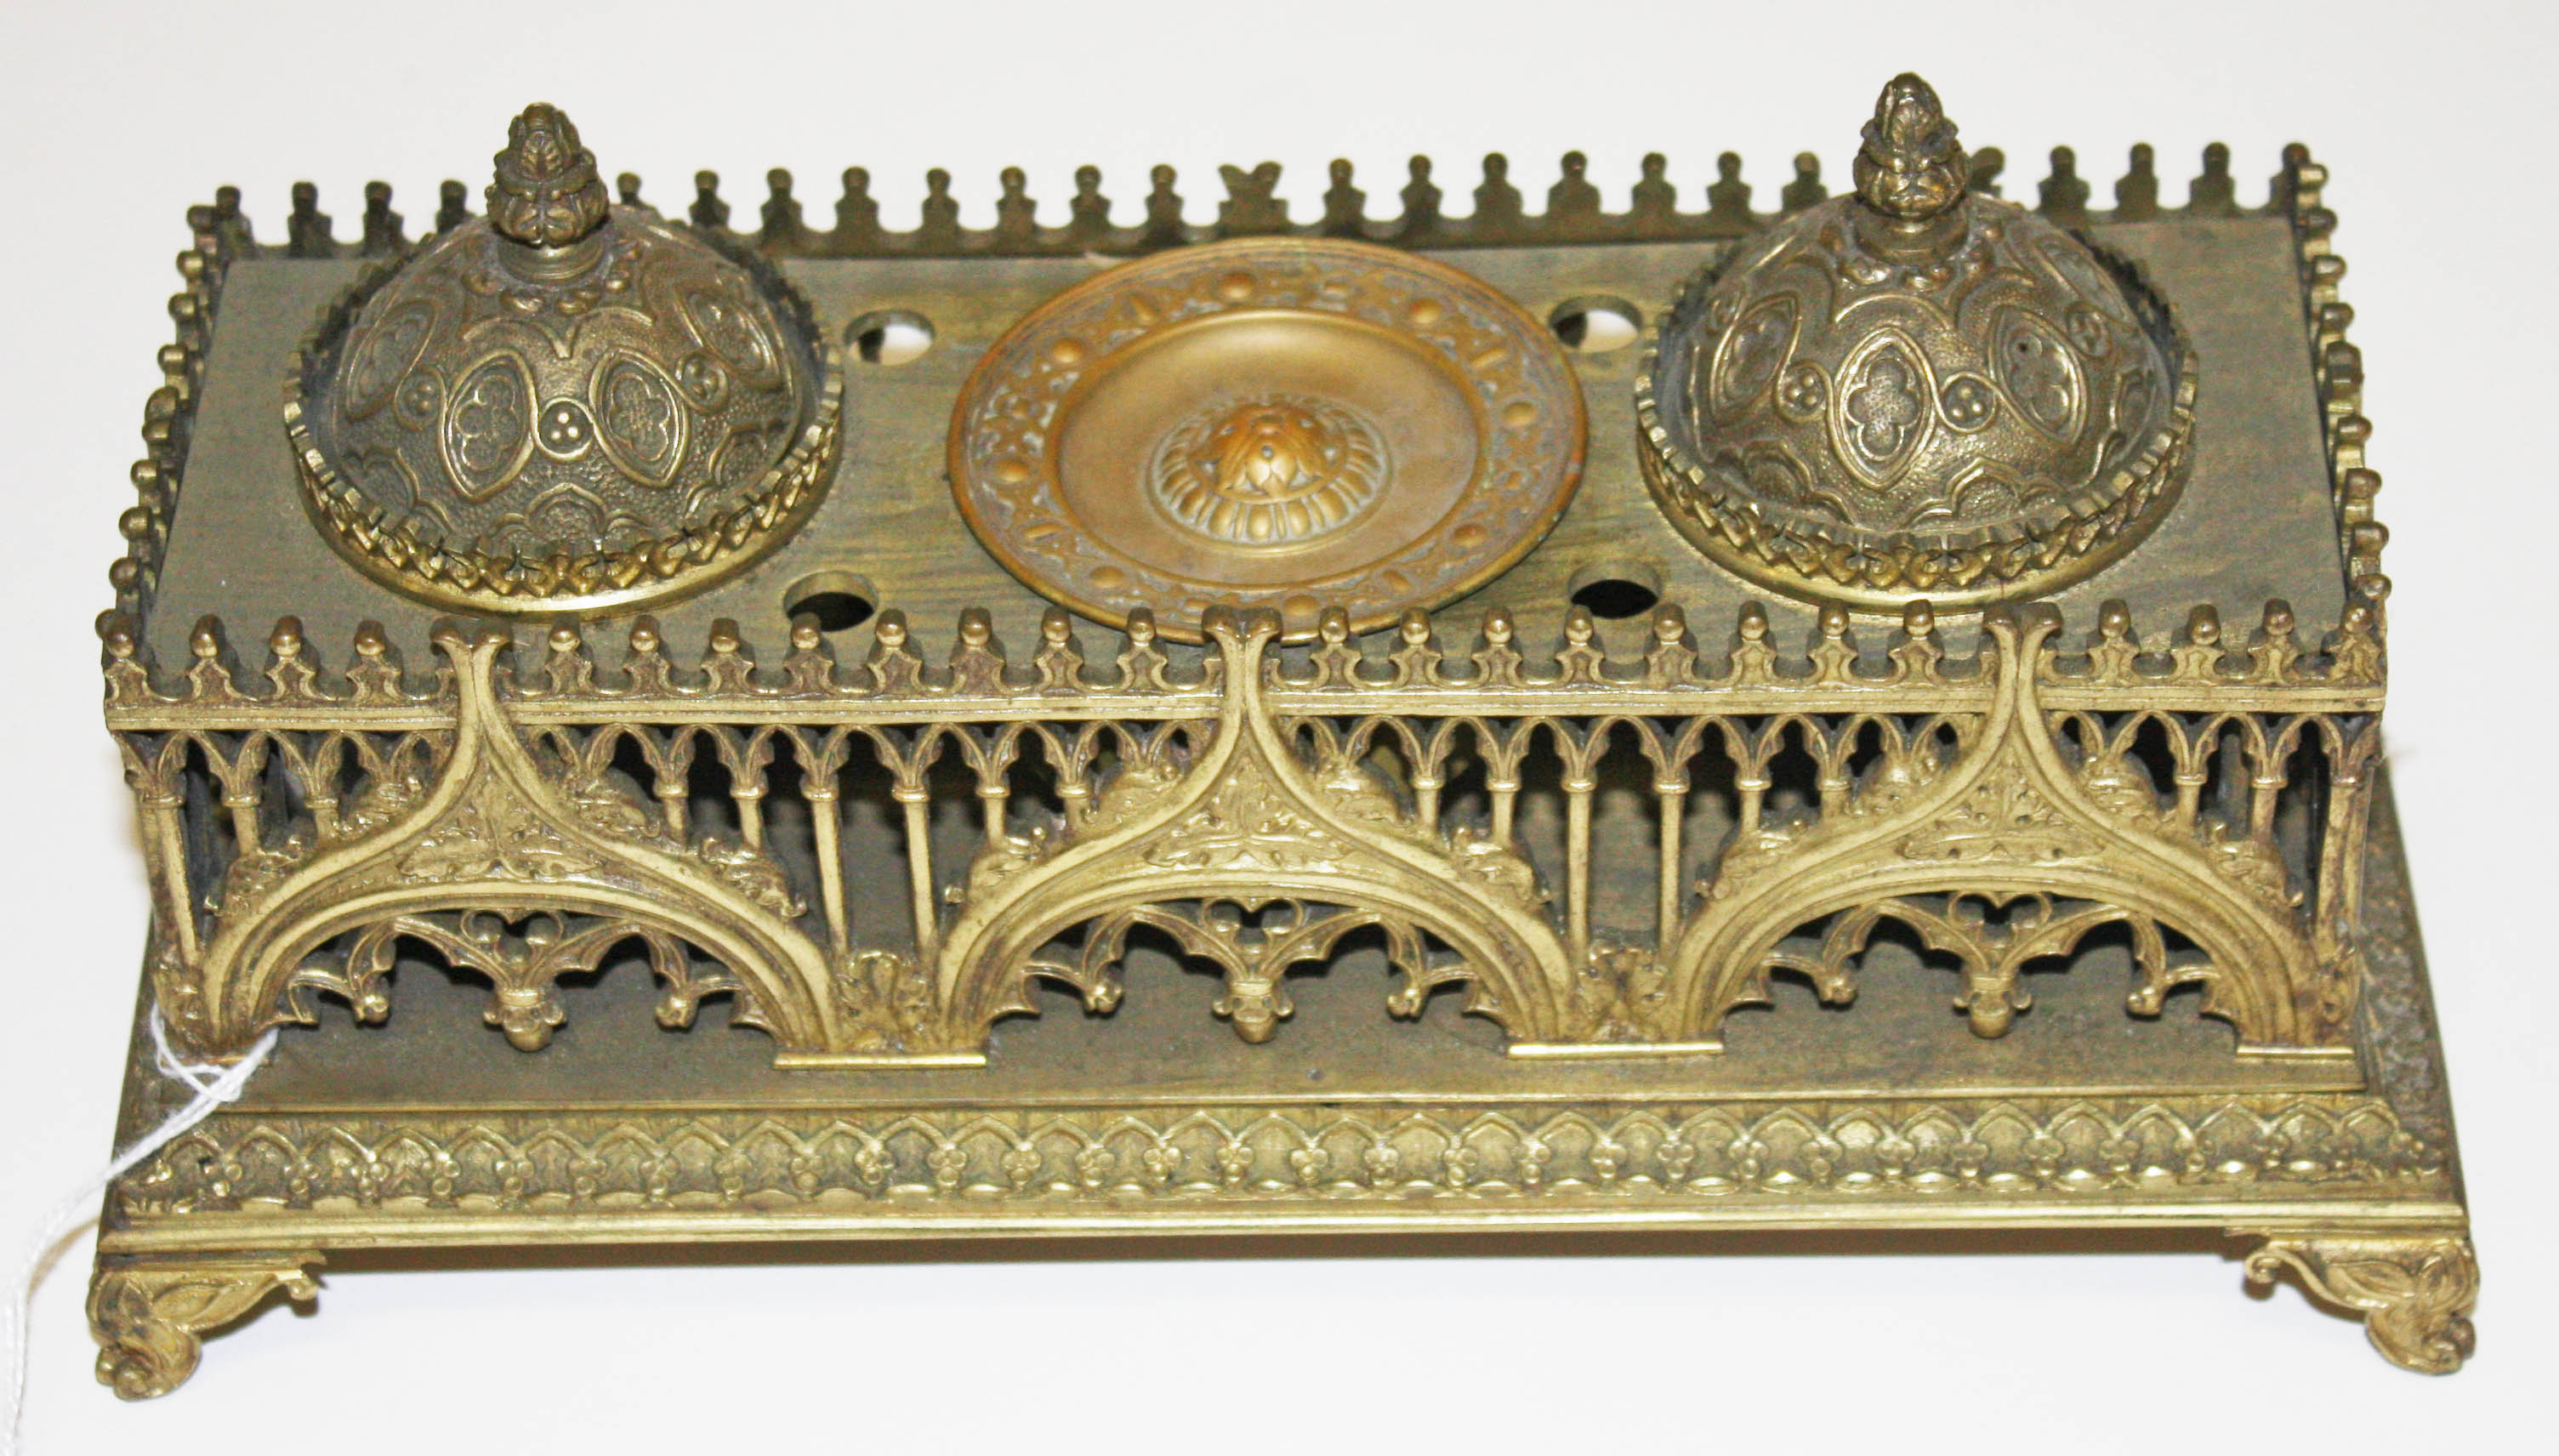 A VERY ATTRACTIVE 19TH CENTURY BRASS DESK STAND, in the Gothic style, with typical pierced tracery